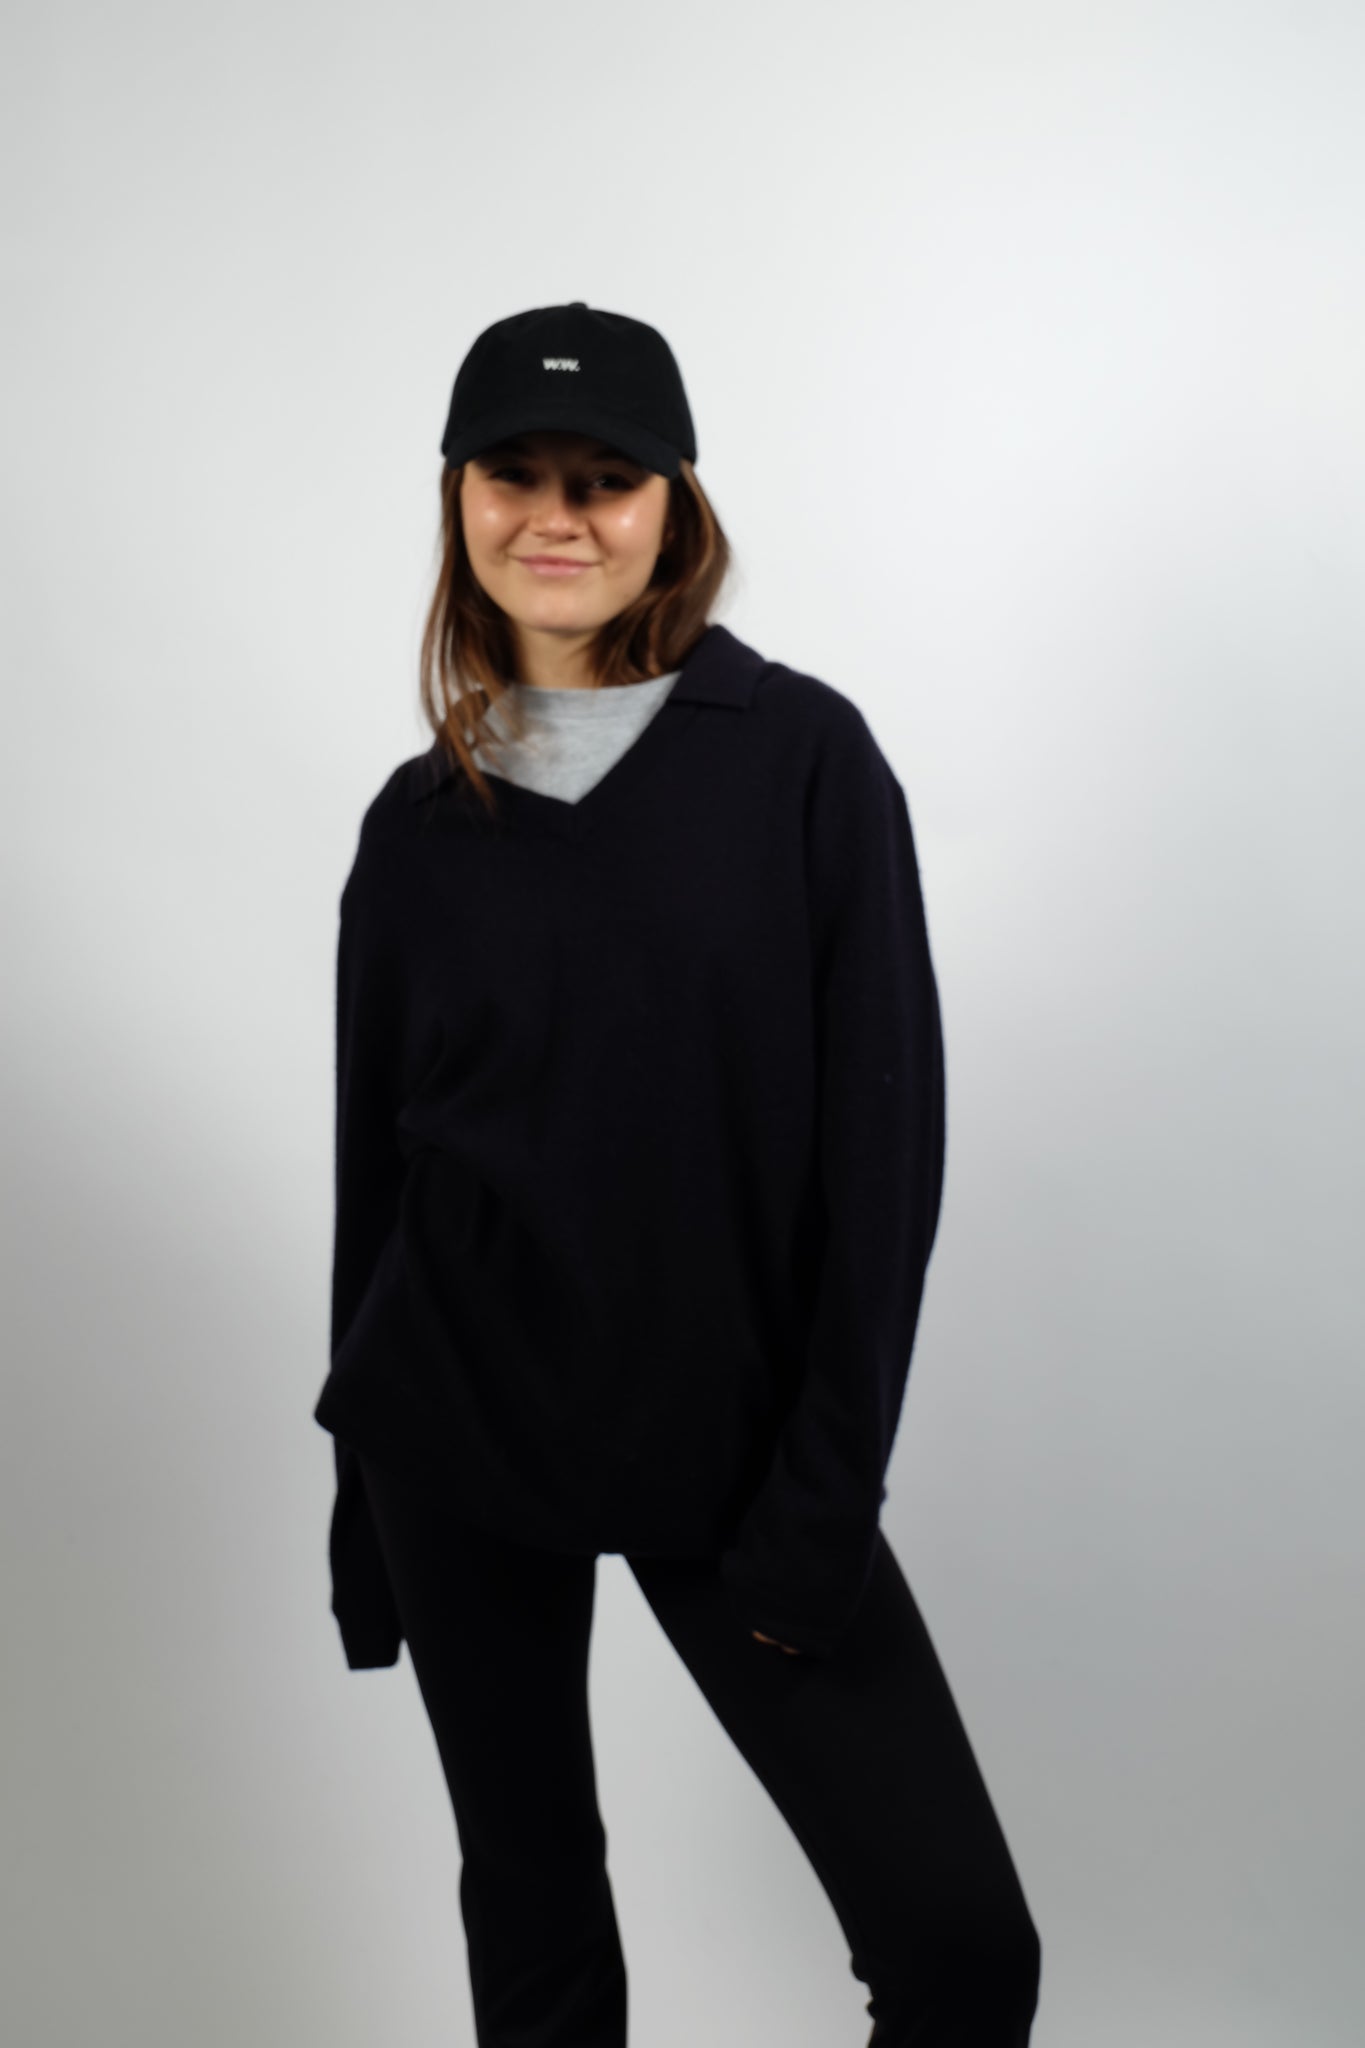 POLO NECK UNISEX OVERSIZED KNIT SWEATER BY HOPE IN DARK BLUE